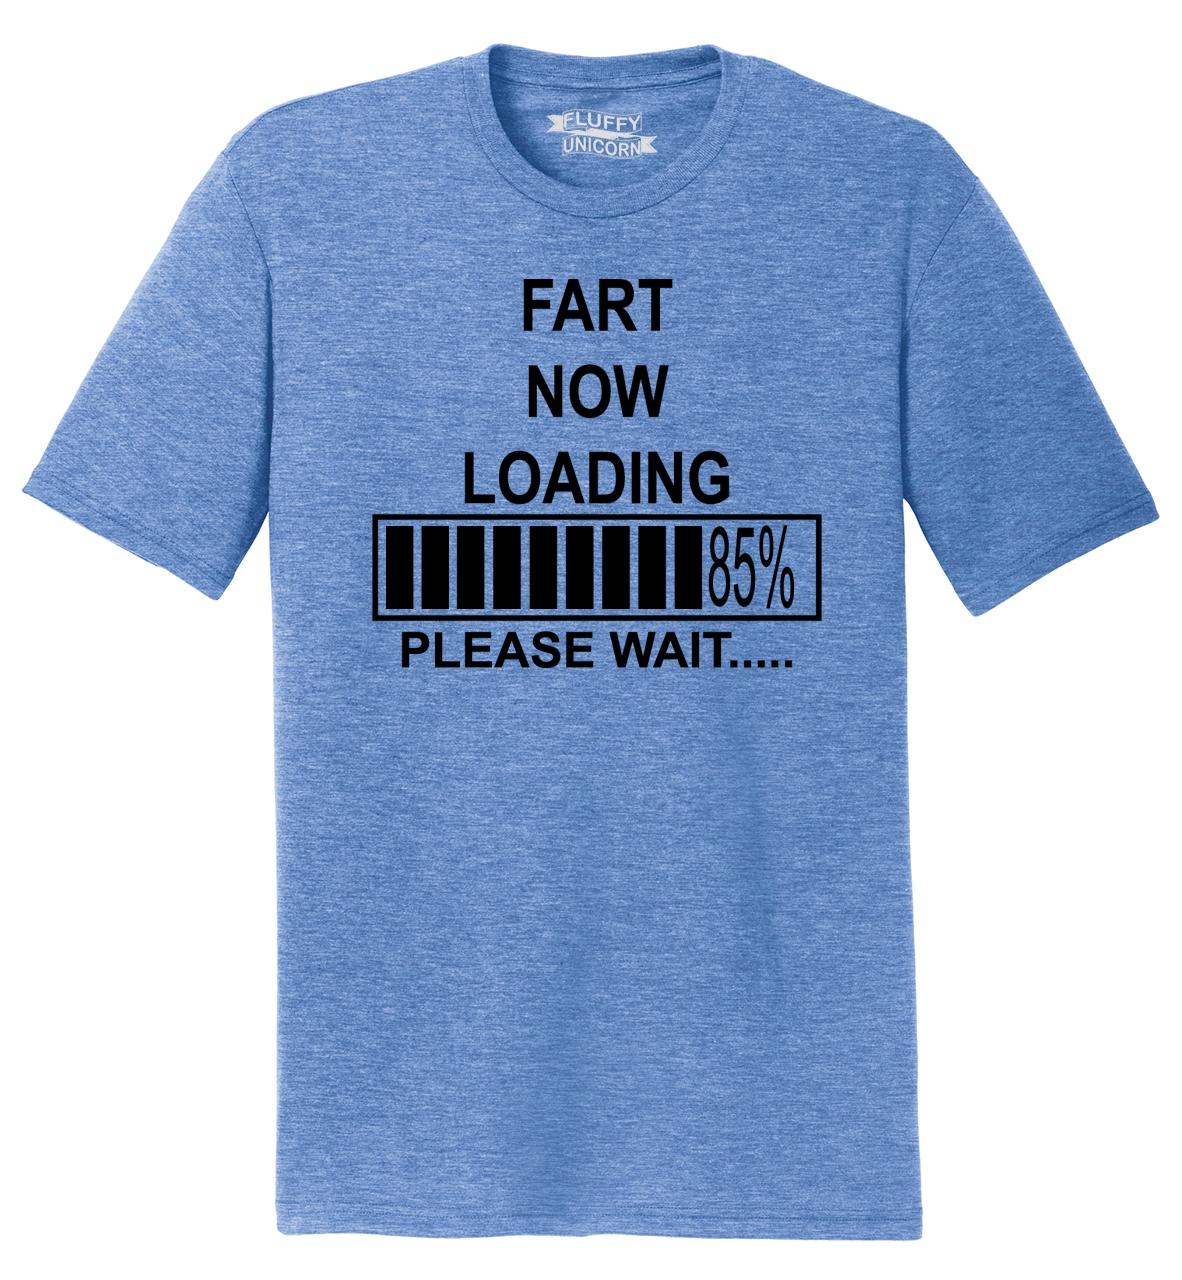 FART NOW LOADING FUNNY PRINTED MENS TSHIRT ADULT HUMOUR OFFENSIVE JOKE GIFT TEE